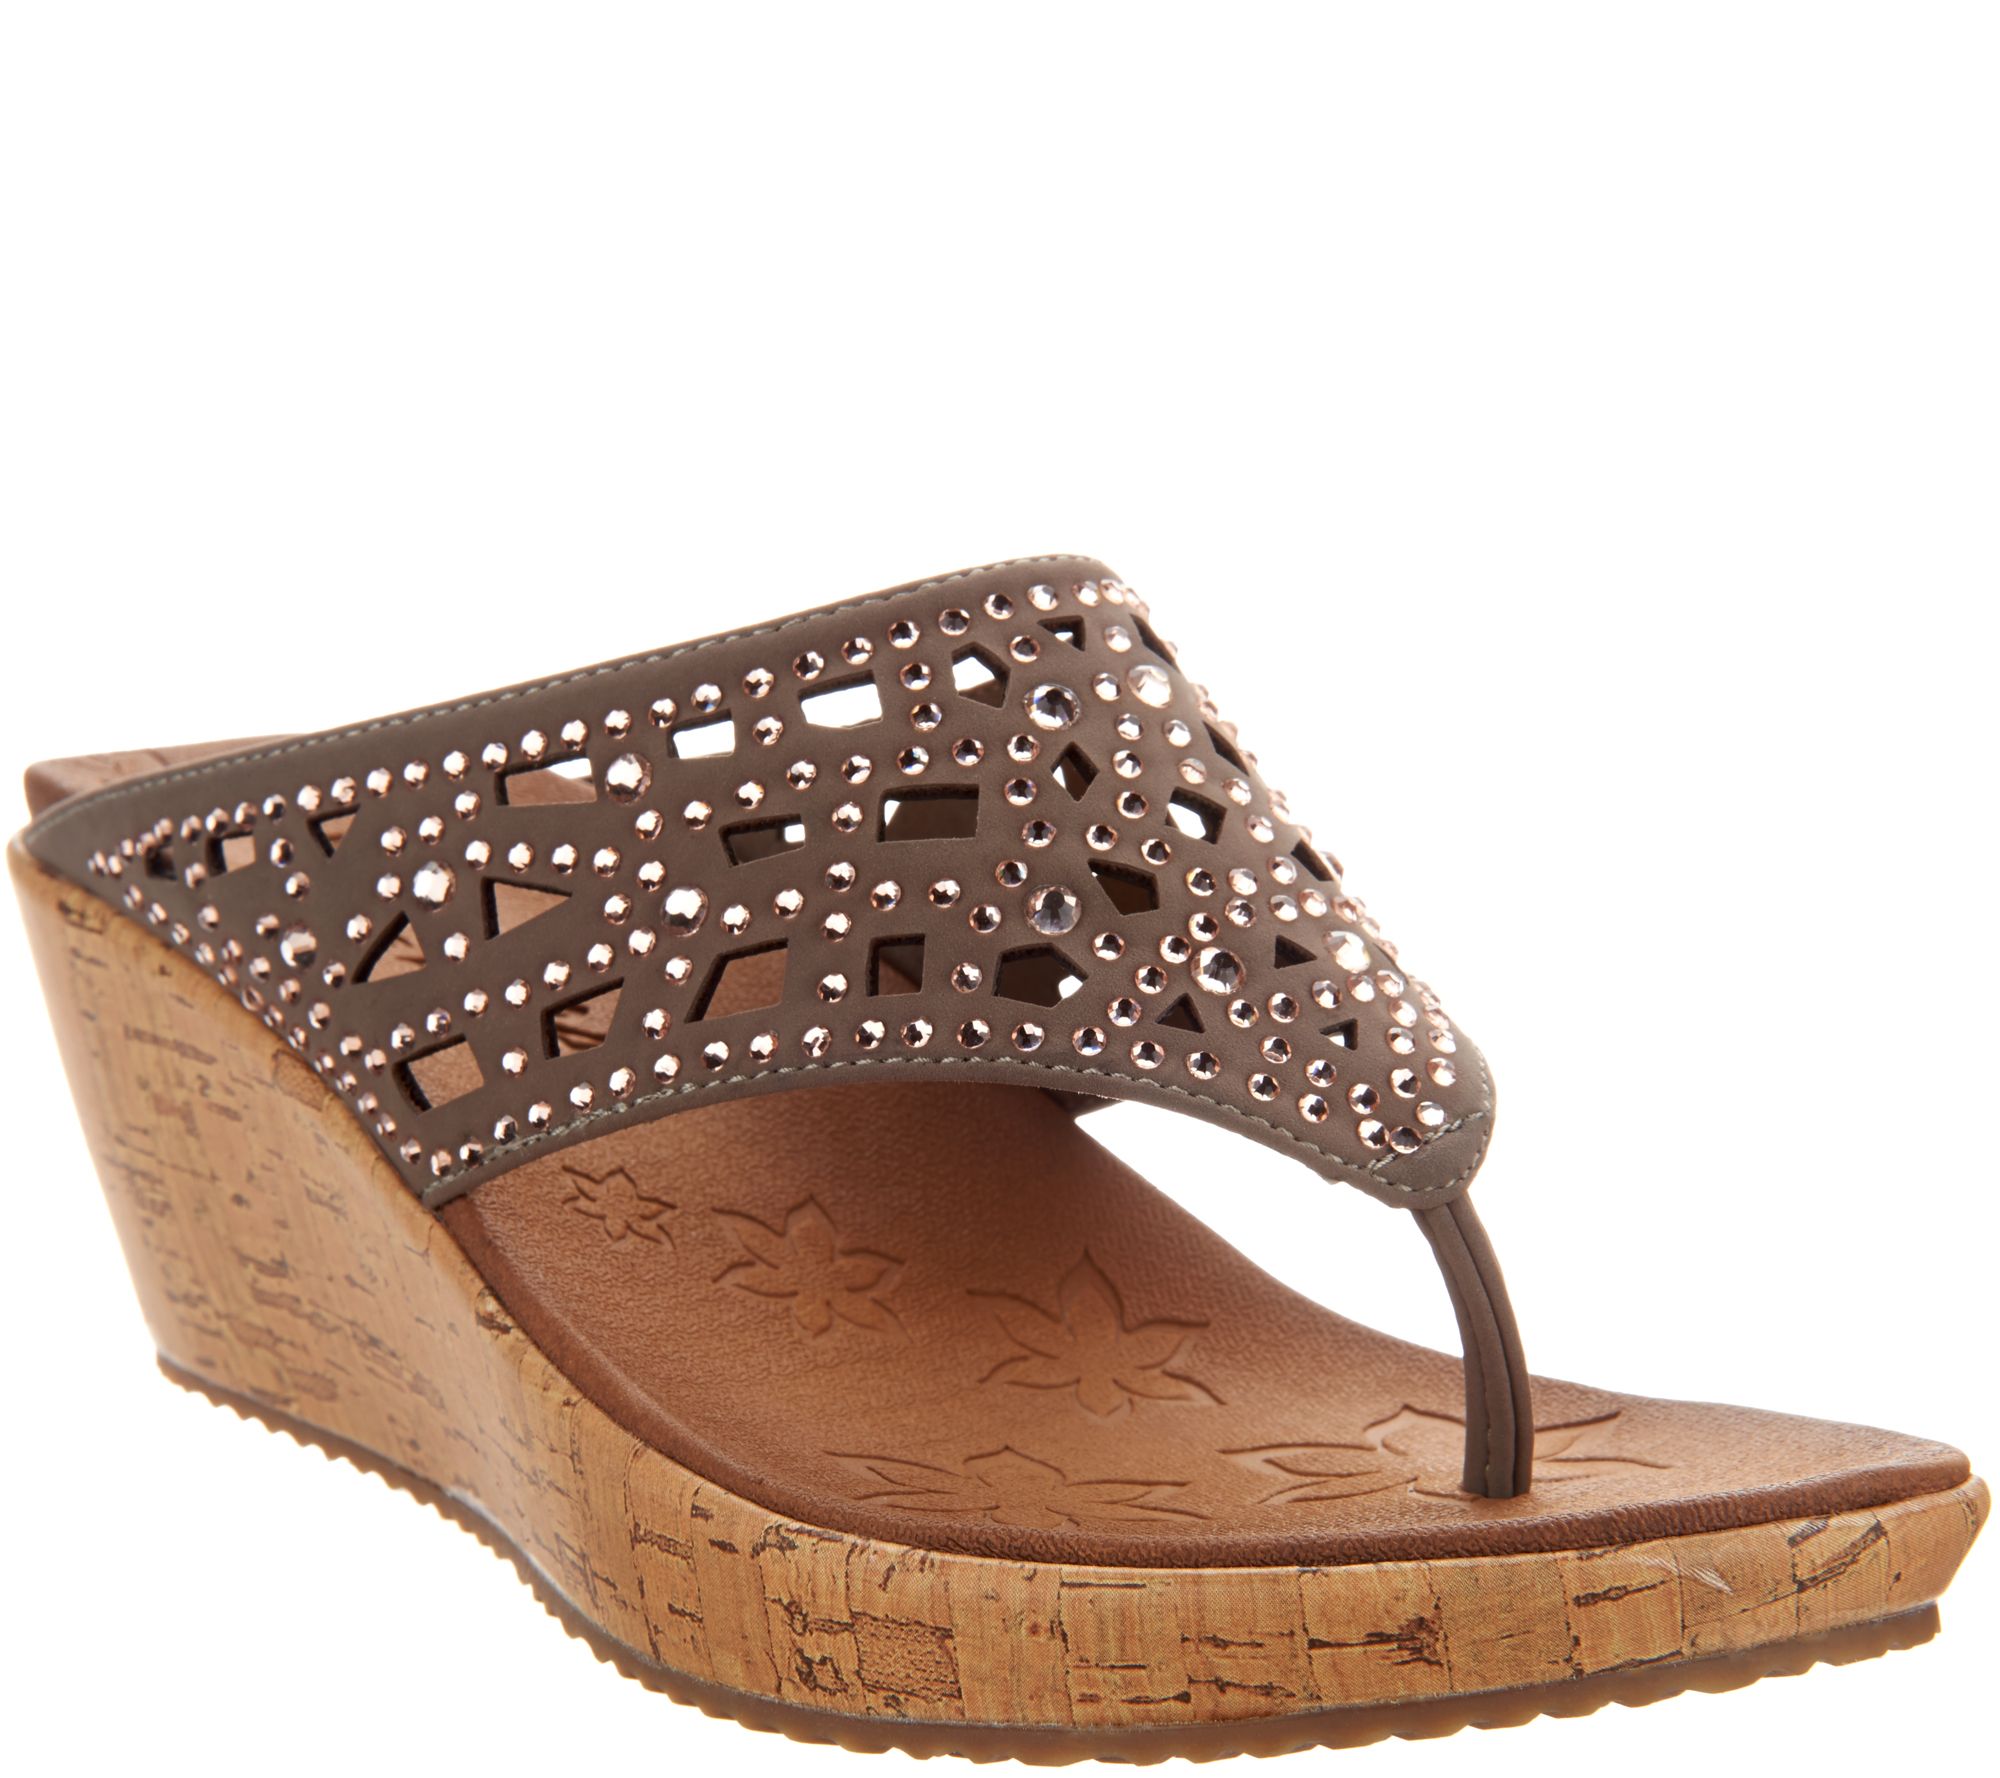 Skechers Wedge Thong Sandals w/ Rhinestones - Dazzled - Page 1 — QVC.com